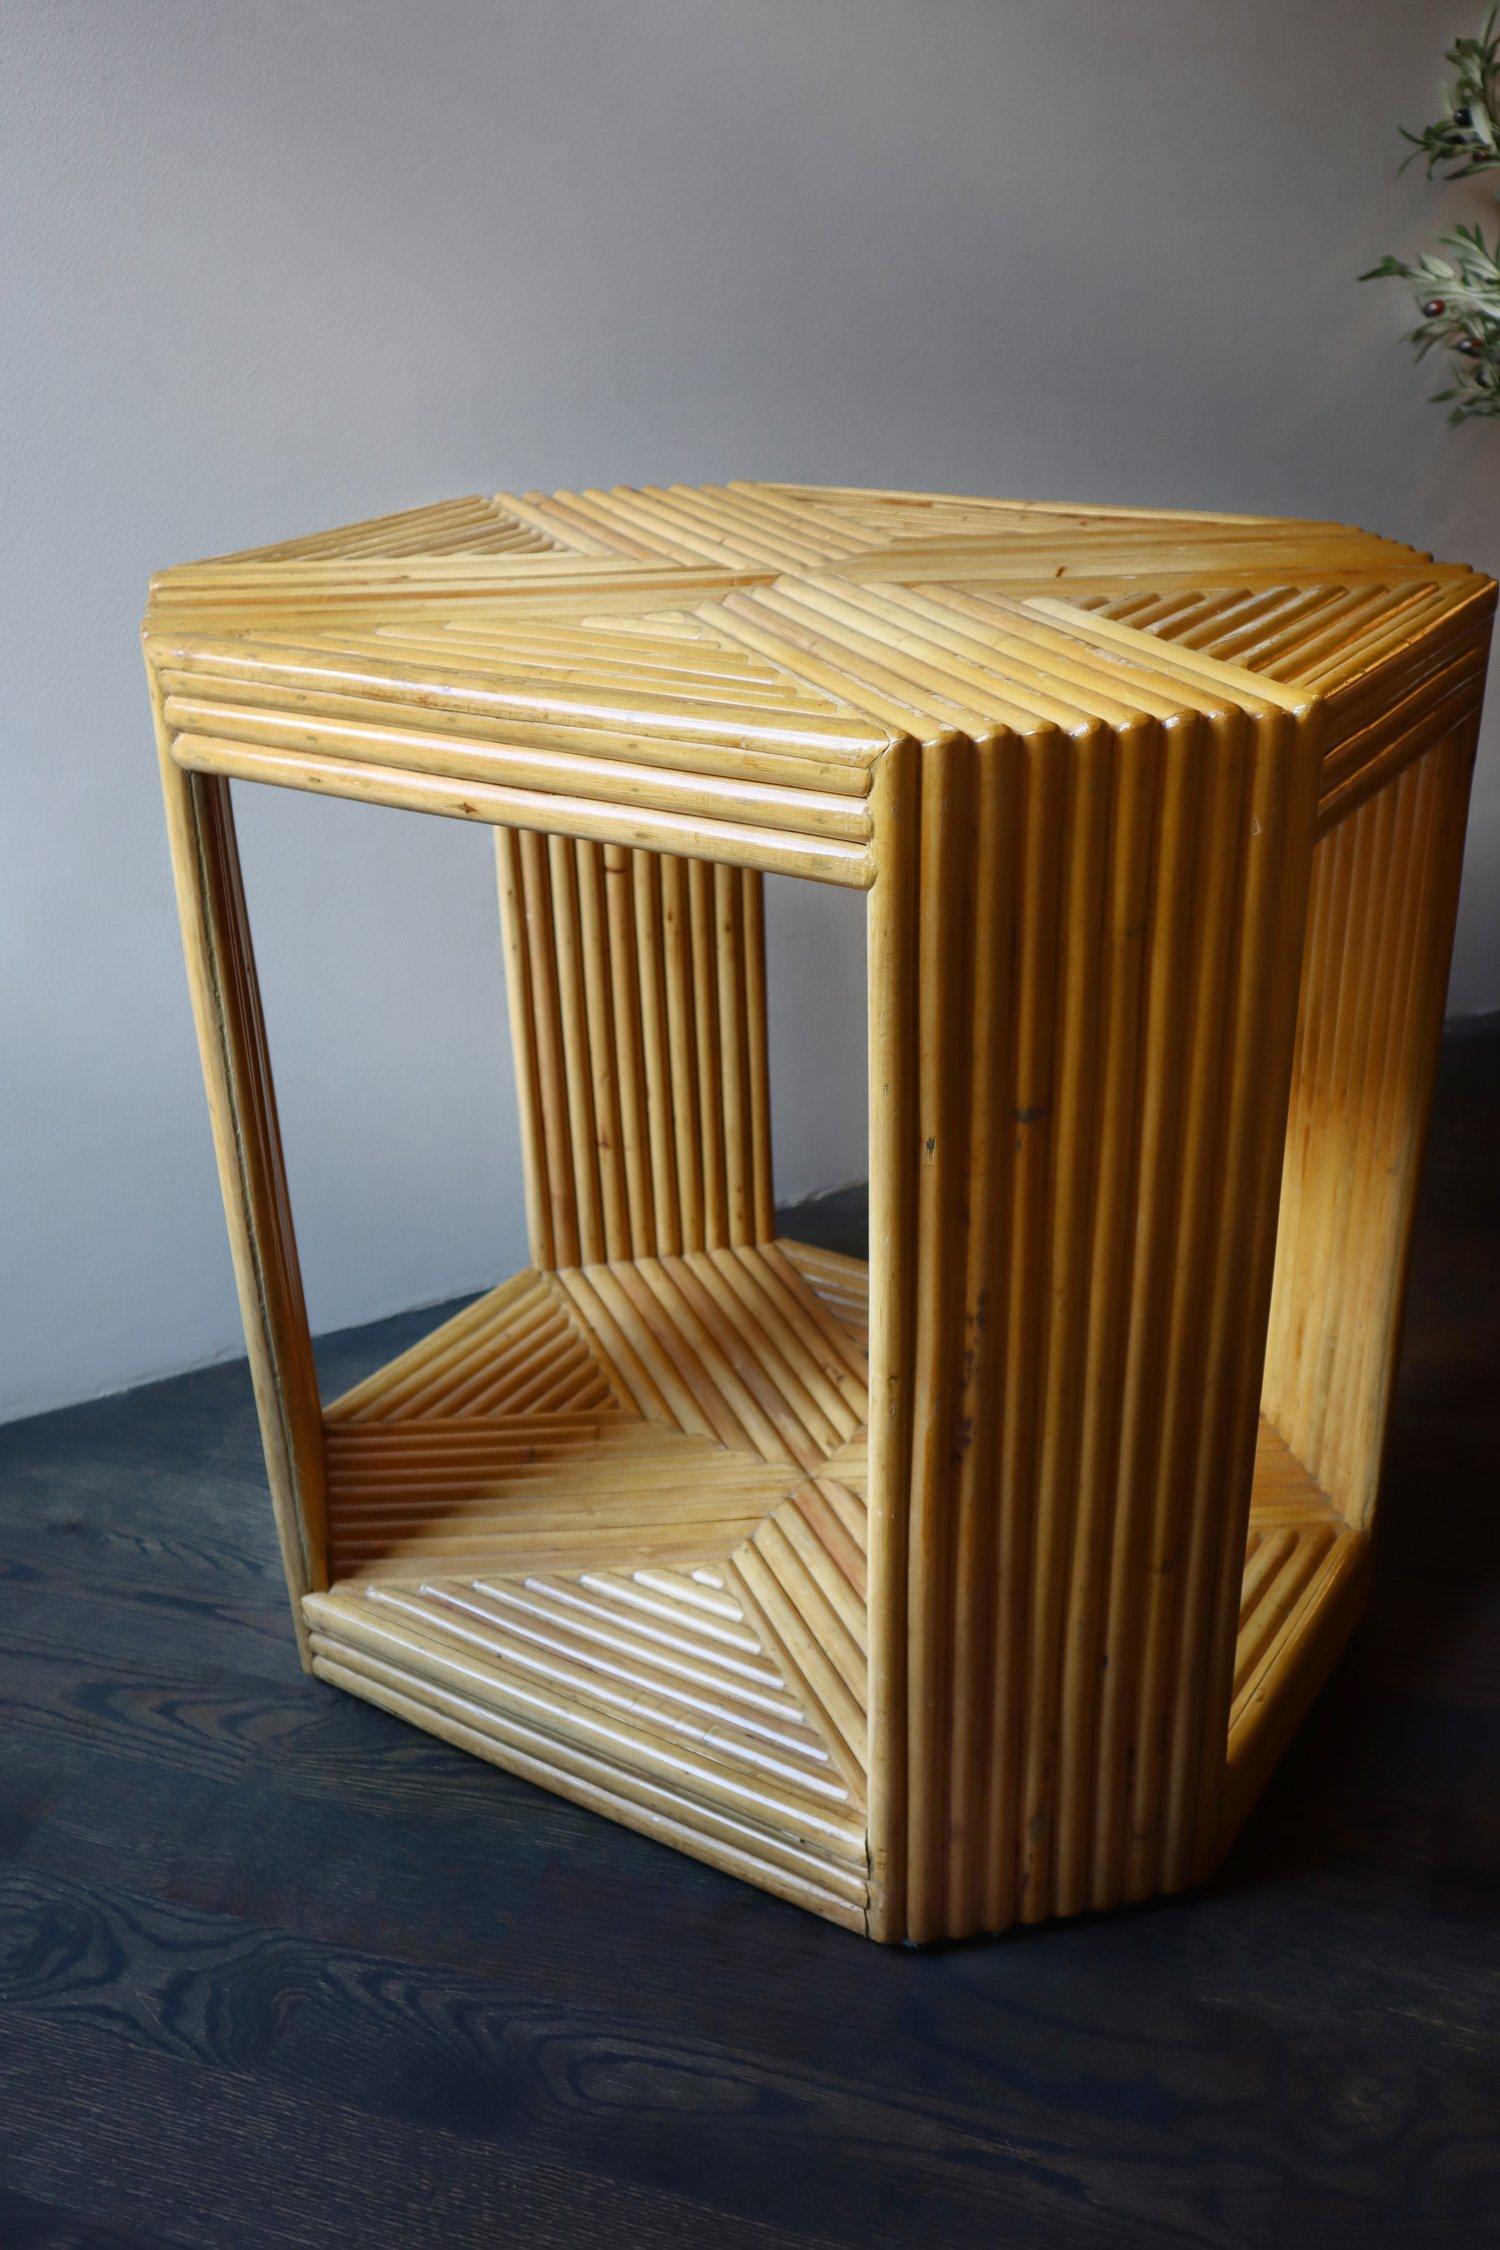 Bamboo reeded side table with X pattern.